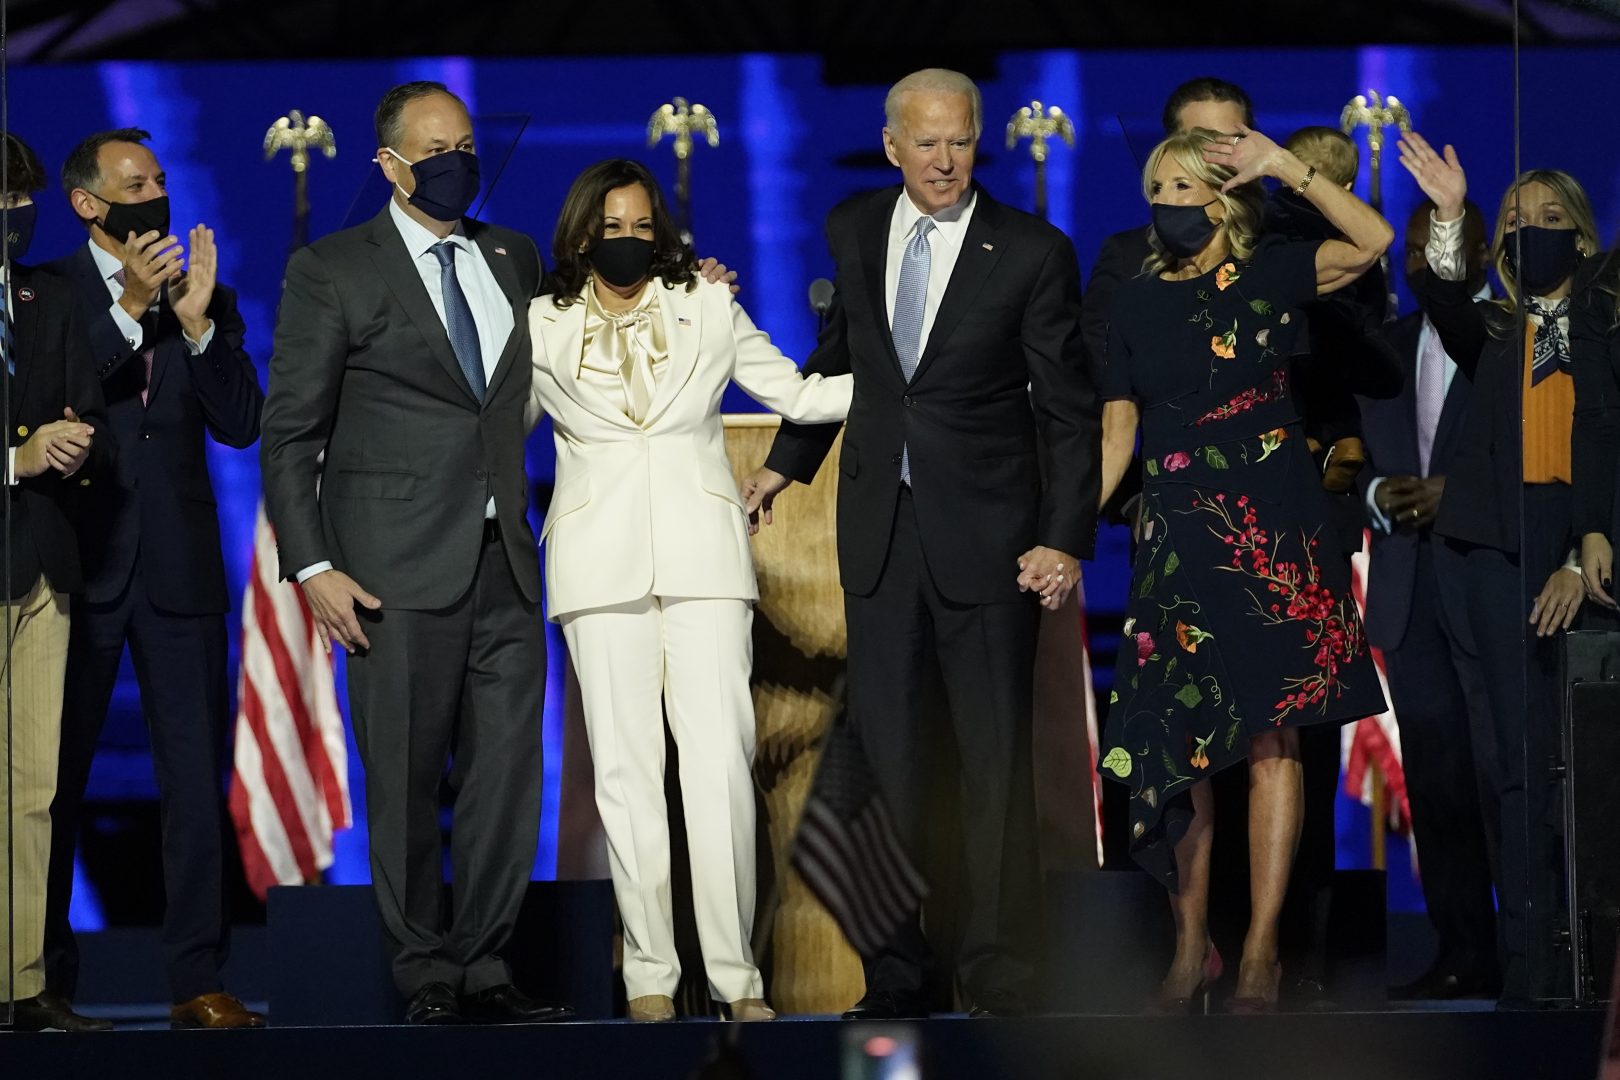 From left, Doug Emhoff, husband of Vice President-elect Kamala Harris, Harris, President-elect Joe Biden and his wife Jill Biden on stage together, Saturday, Nov. 7, 2020, in Wilmington, Del.